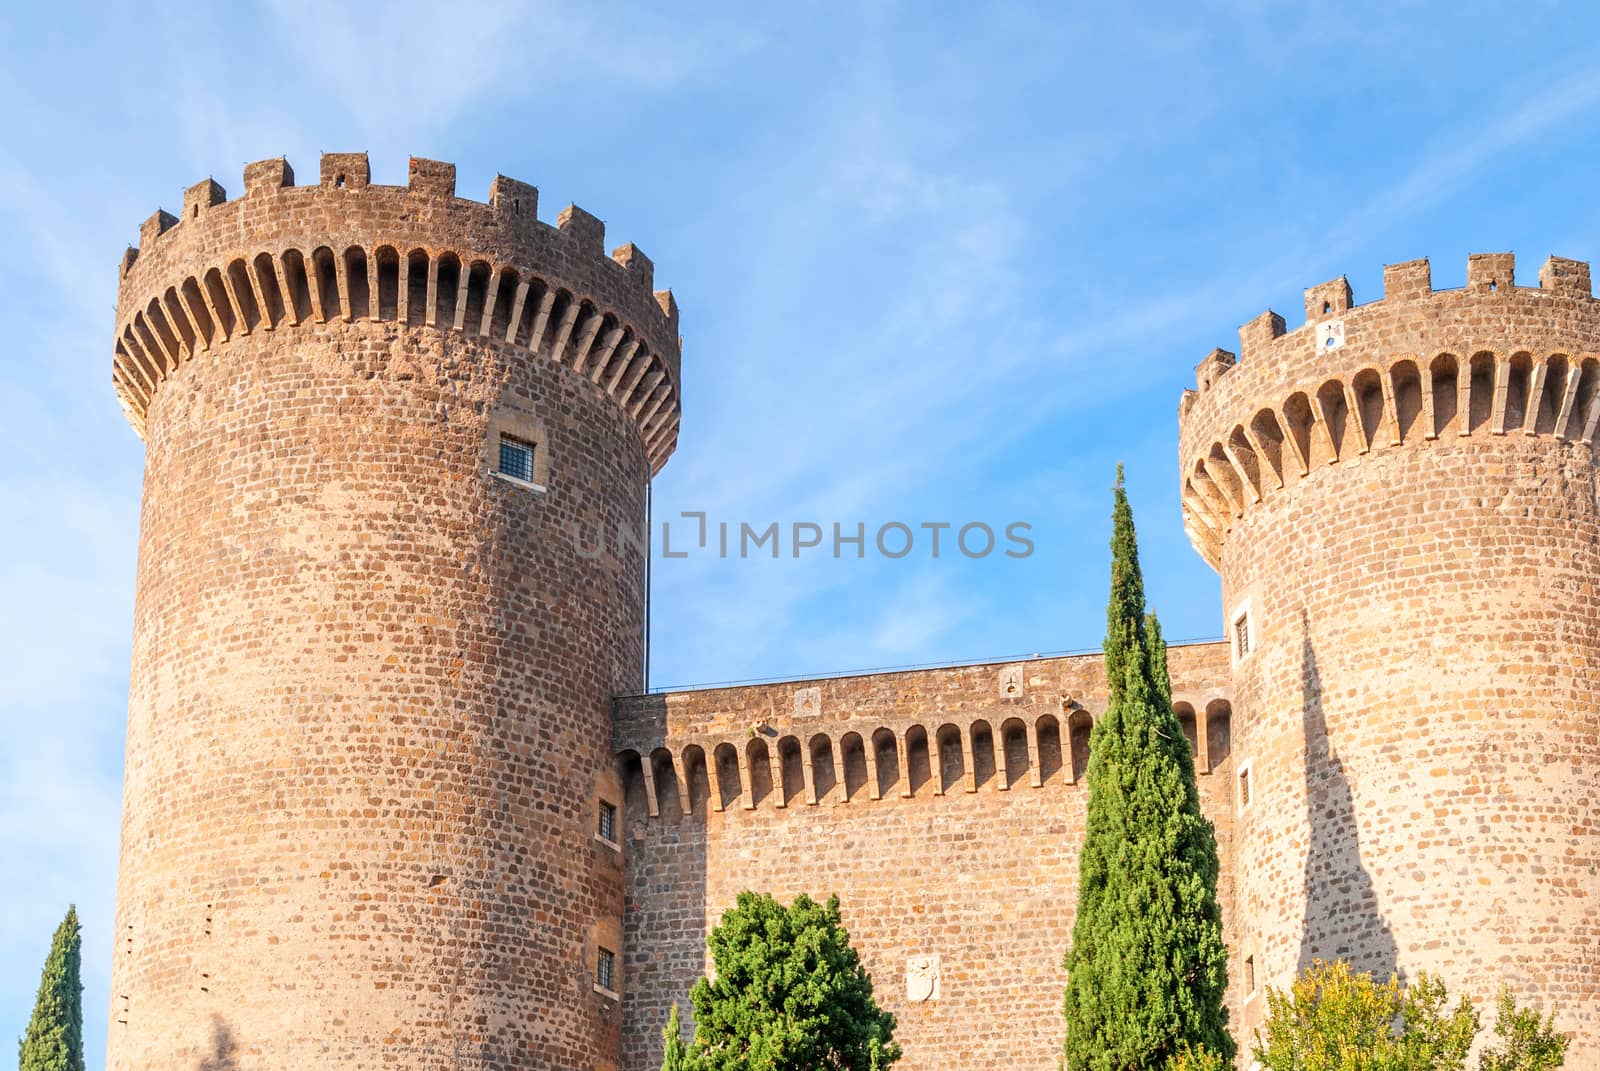 Ancient castle with towers of Rocca Pia in the center of Tivoli, by Zhukow